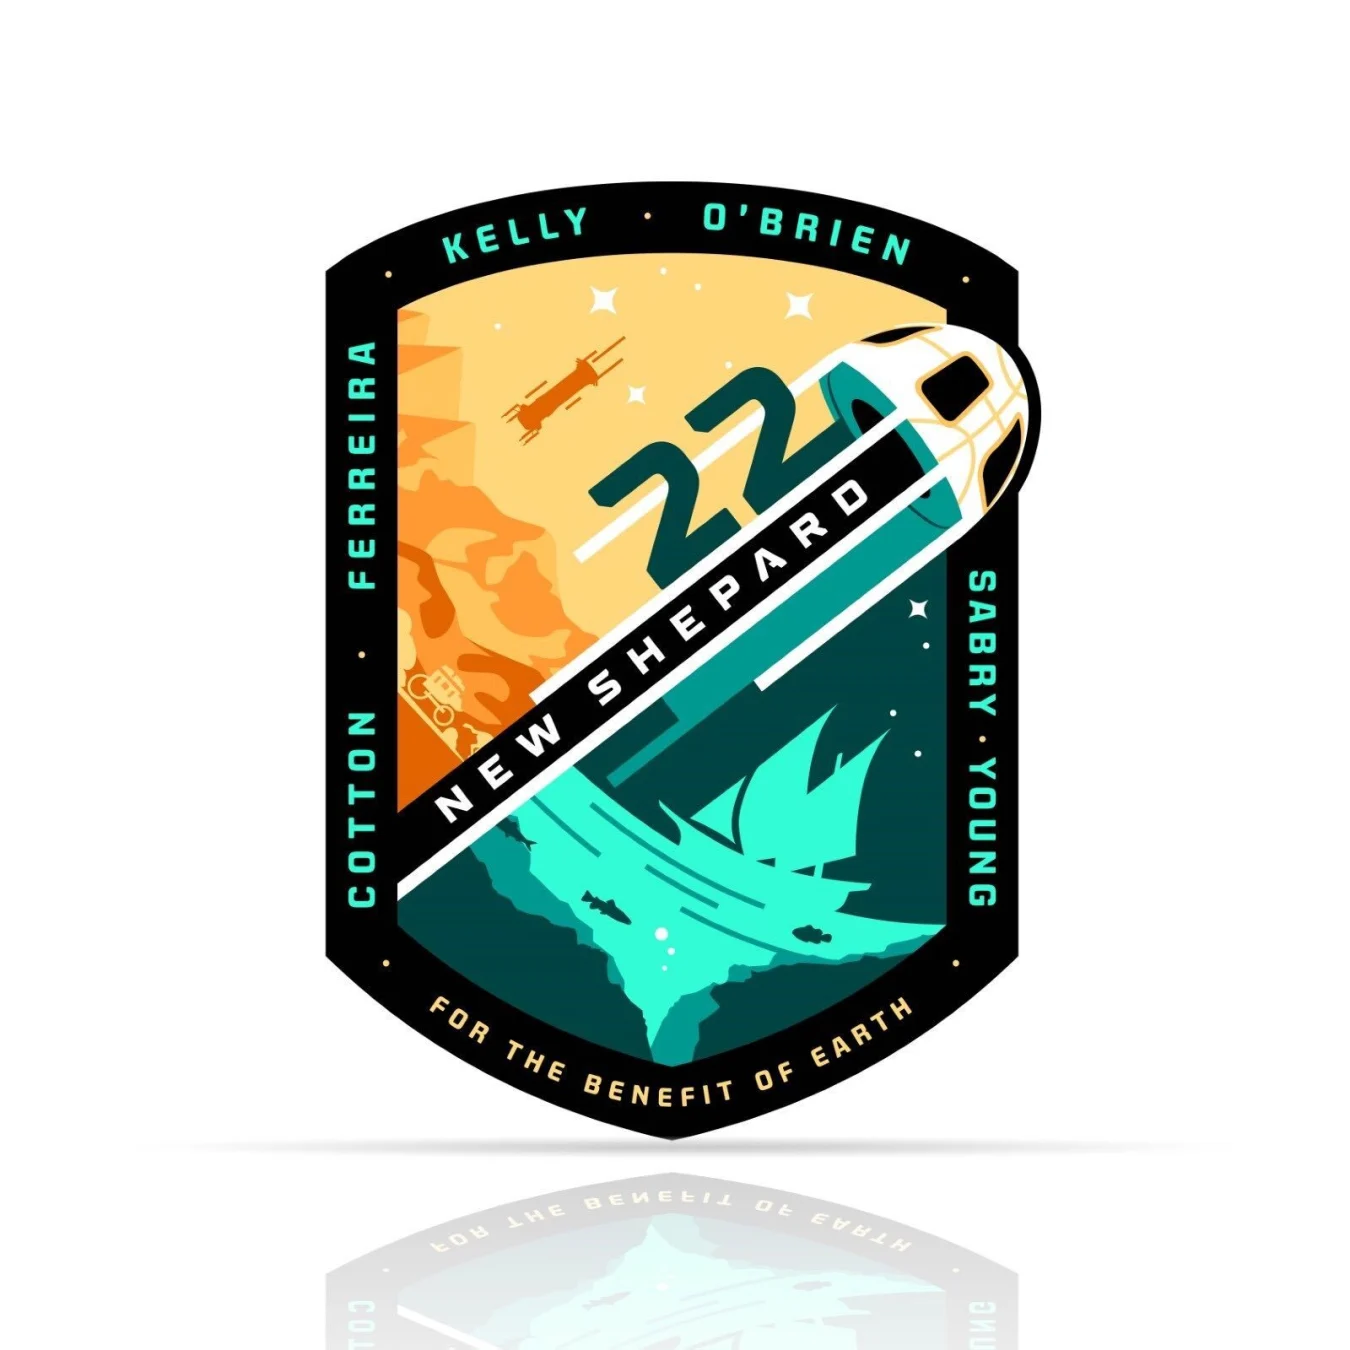 The mission patch for New Shepard's NS-22 mission. It features symbols including:

The Pyramids of Egypt represent Sara Sabry’s heritage and celebrate her accomplishment as the country’s first astronaut.  

The Mariana Trench represents Vanessa O’Brien’s feat in reaching Challenger Deep, Earth’s deepest point.  

The crew capsule is depicted as a basketball, symbolizing Dude Perfect’s trick shots and Coby Cotton’s role in co-founding the company. 

Magellan’s ship represents Mário Ferreira’s Portuguese heritage and lifelong passion for adventure.  

The fish swimming below Magellan’s ship symbolize Steve Young’s passion for fishing. 

The stagecoach represents Clint Kelly III’s aspirations for humanity’s reach into the new frontier of space.  

New Shepard’s booster and the West Texas mountains are also represented in the patch.